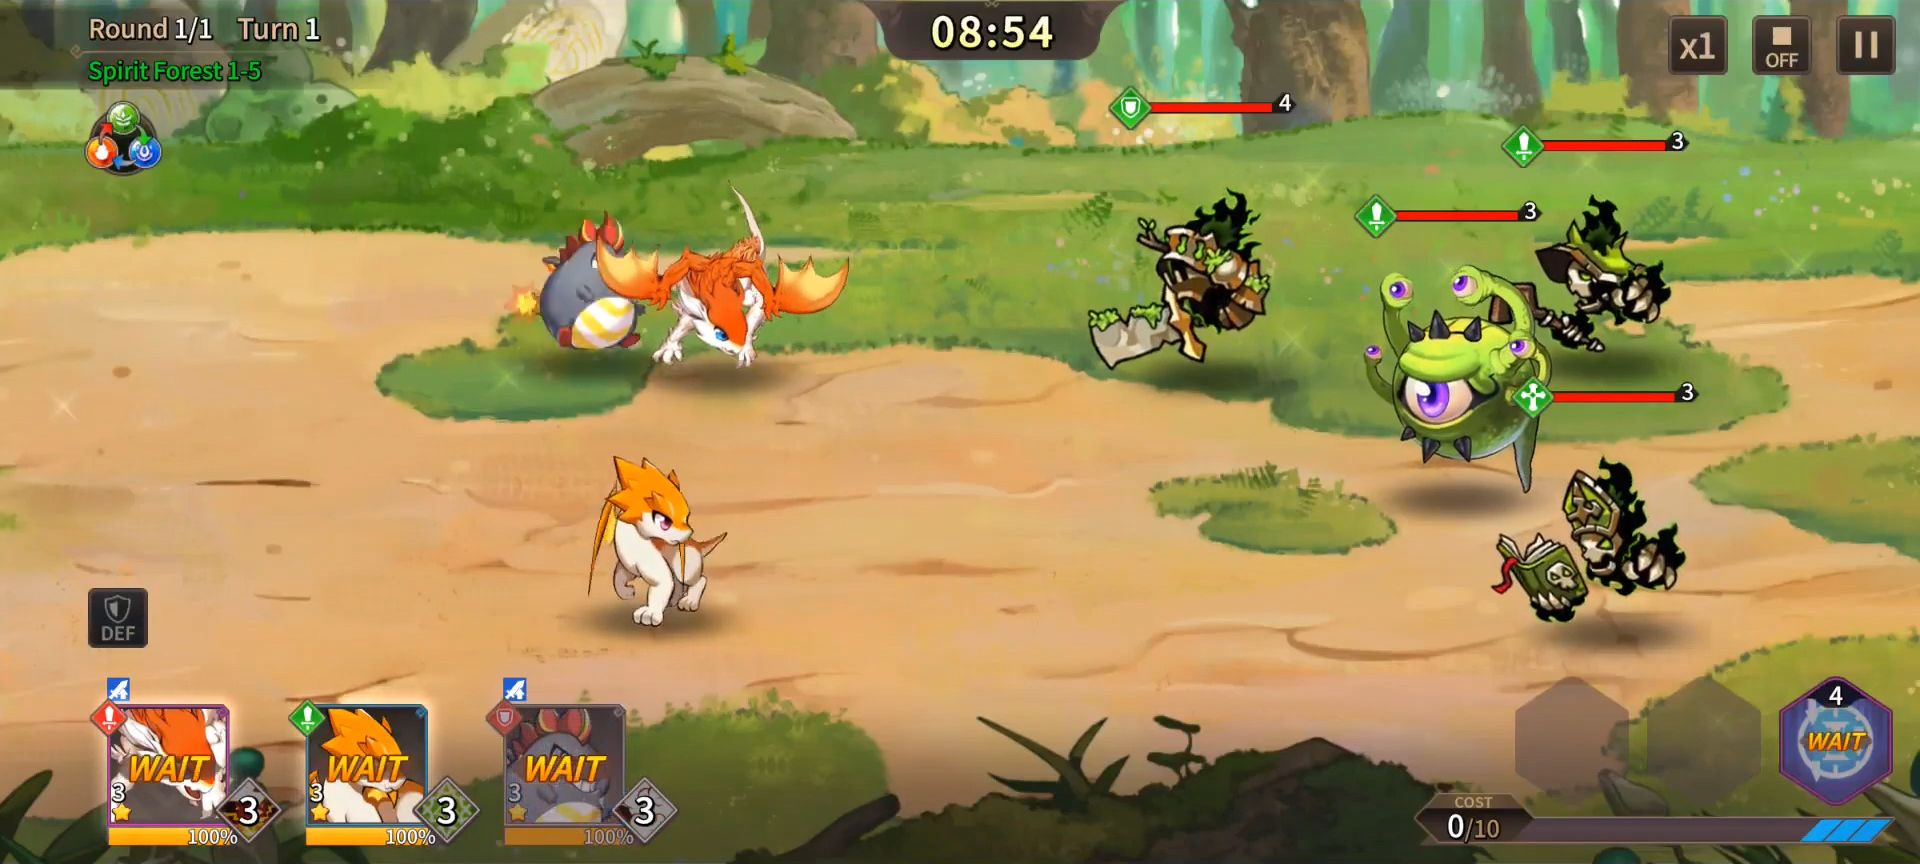 Gameplay of the Dragon Village Grand Battle for Android phone or tablet.